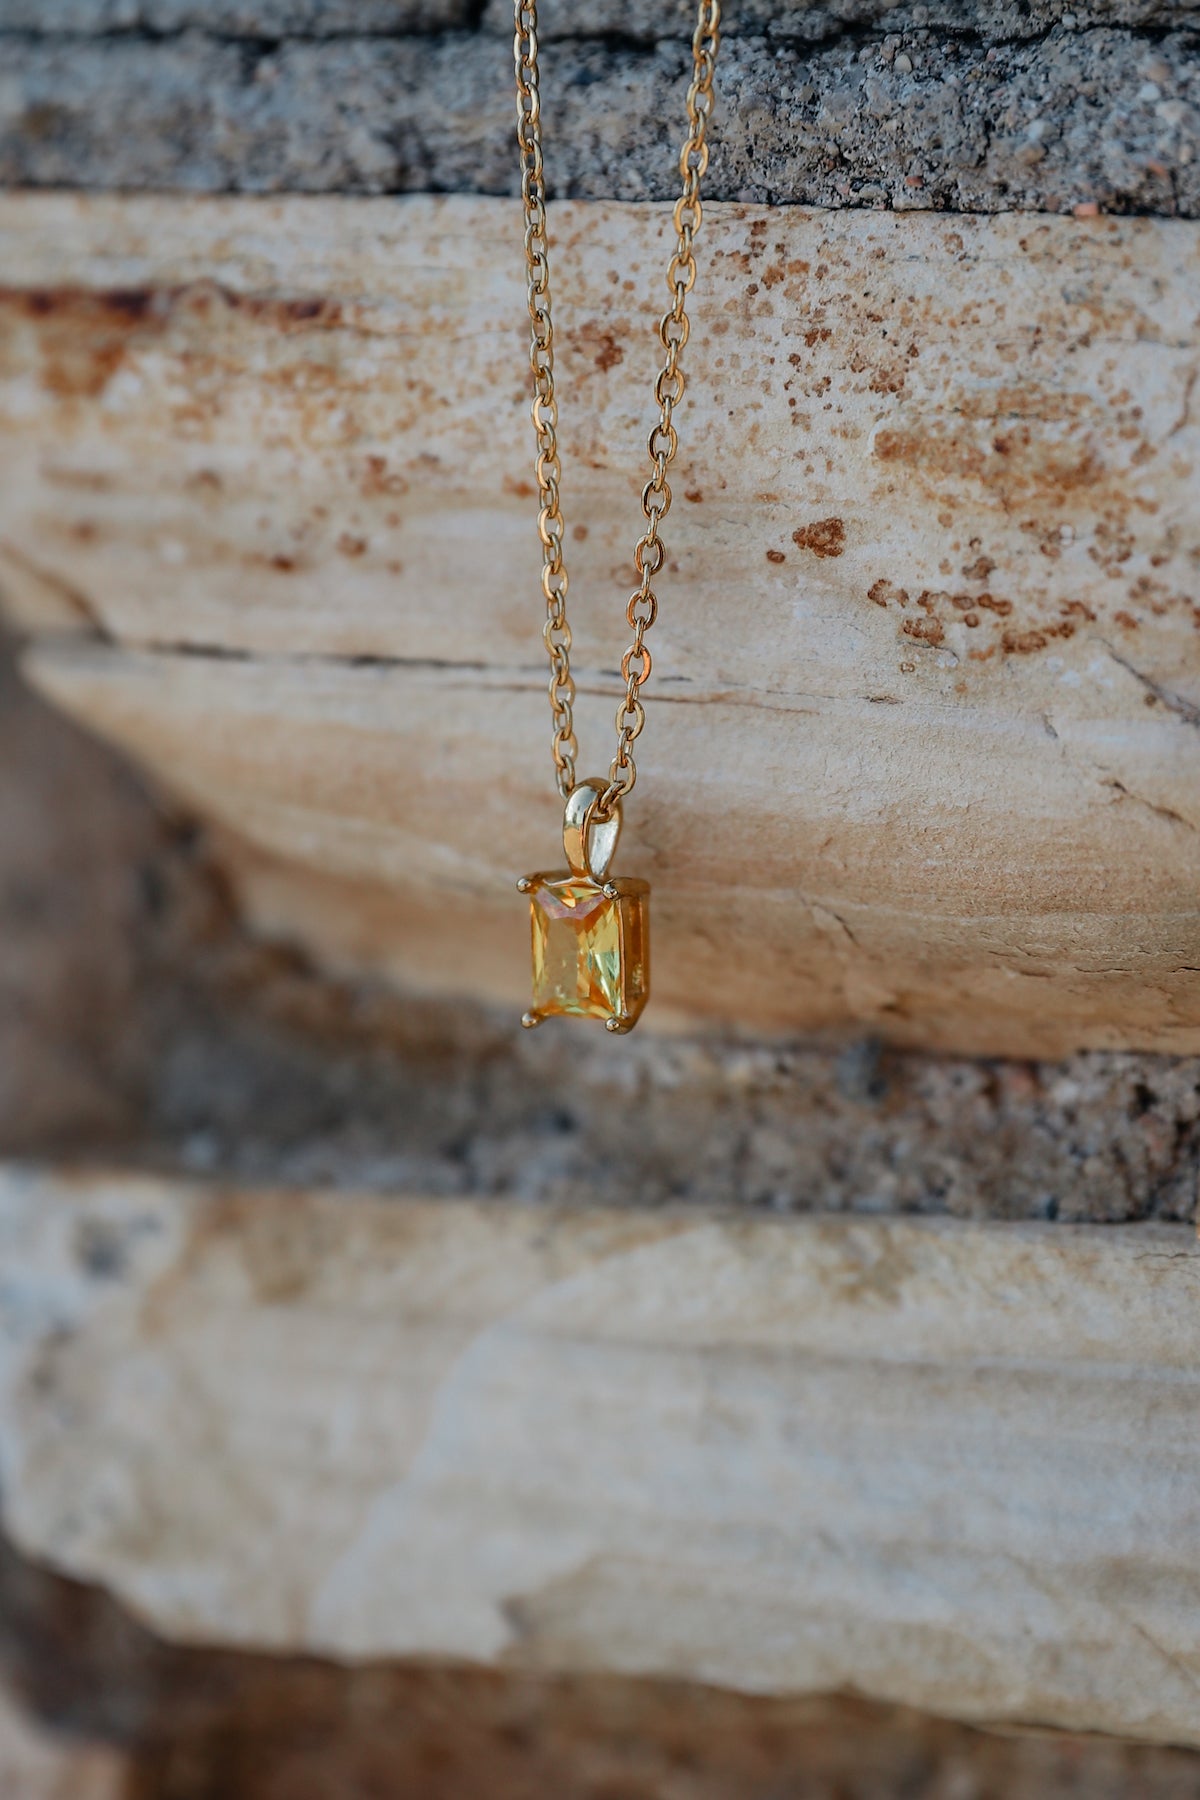 Yellow crystal  The one necklace against stone backdrop